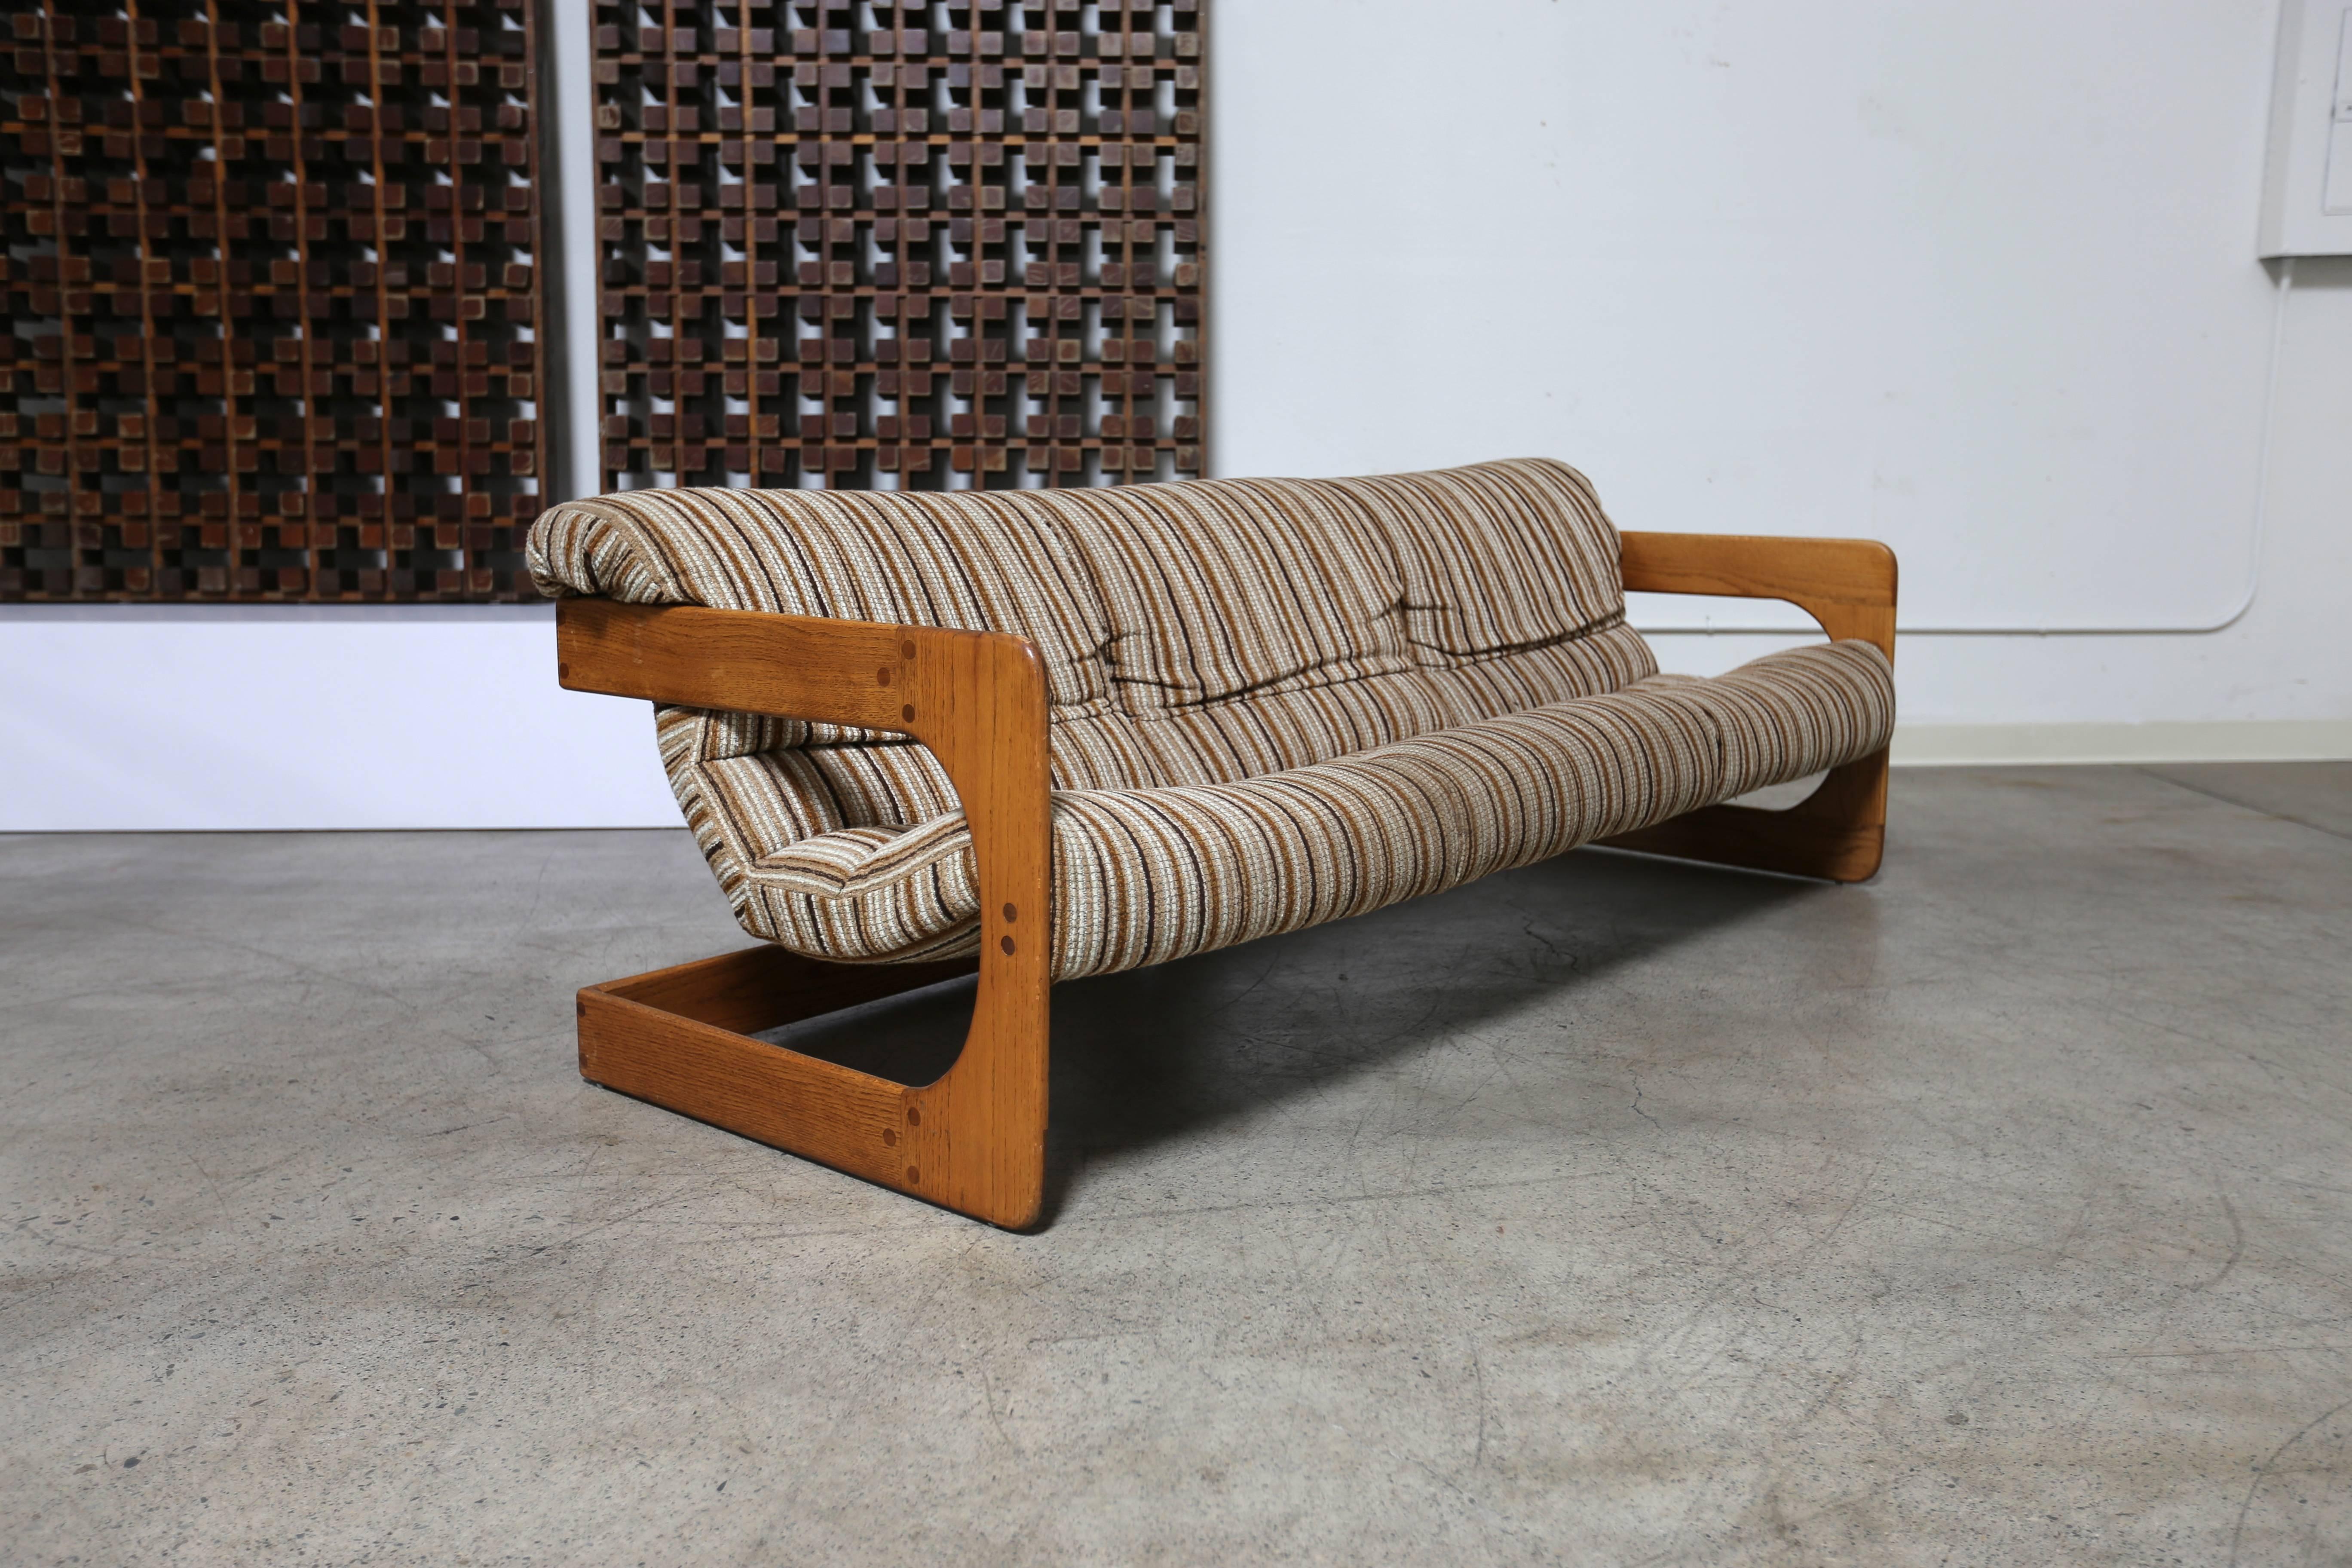 Solid oak sofa by Lou Hodges for California Design Group.